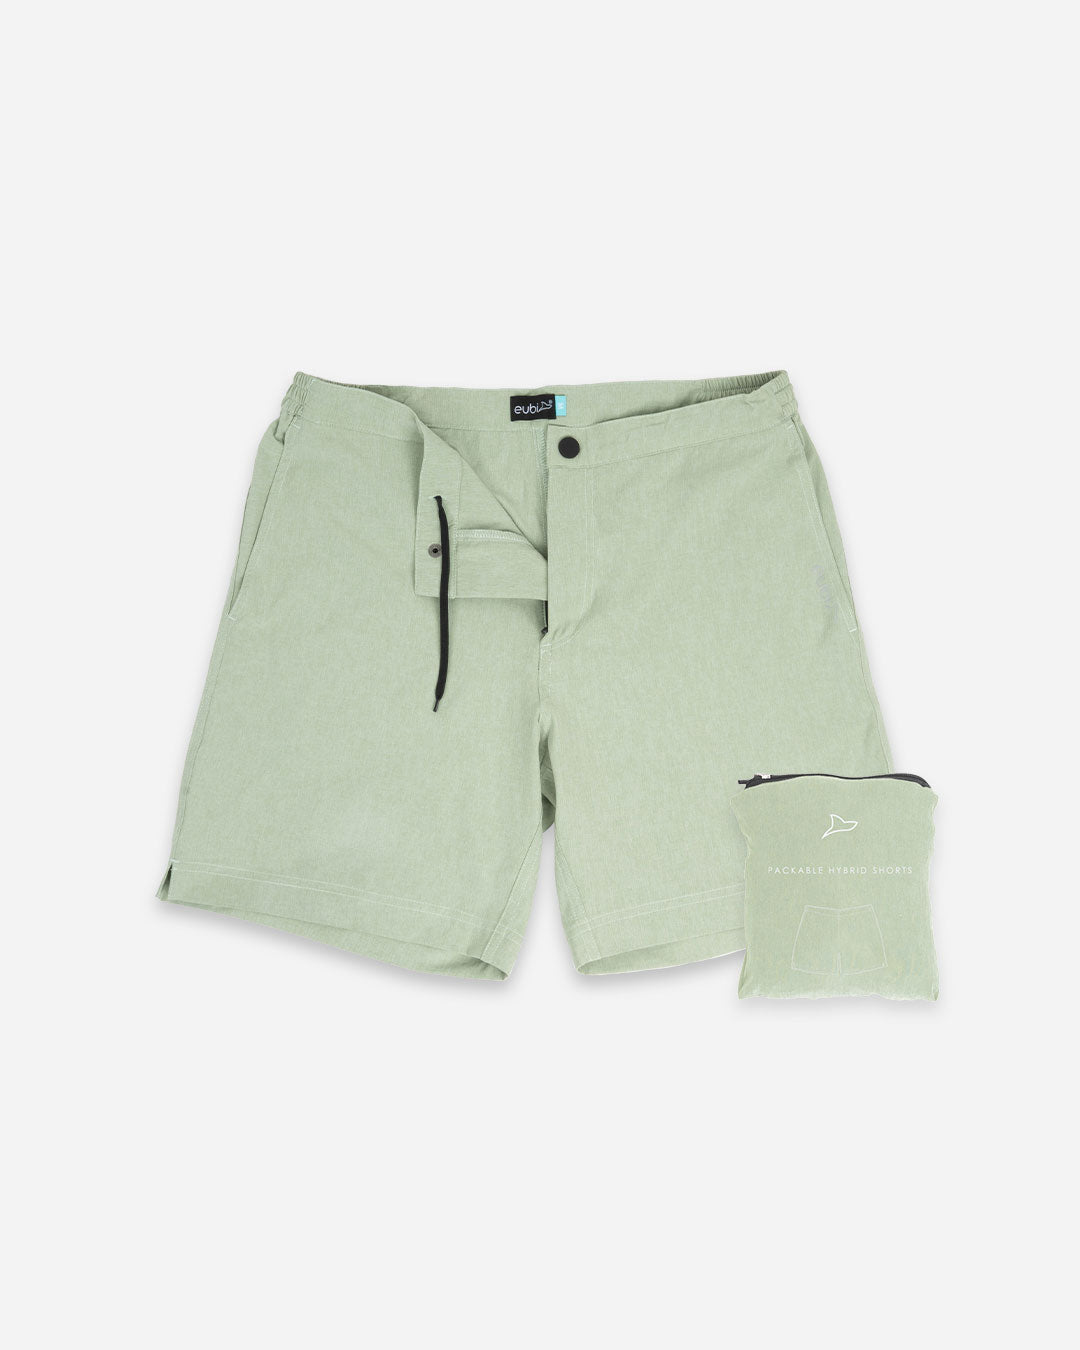 7" Packable Hybrid Shorts